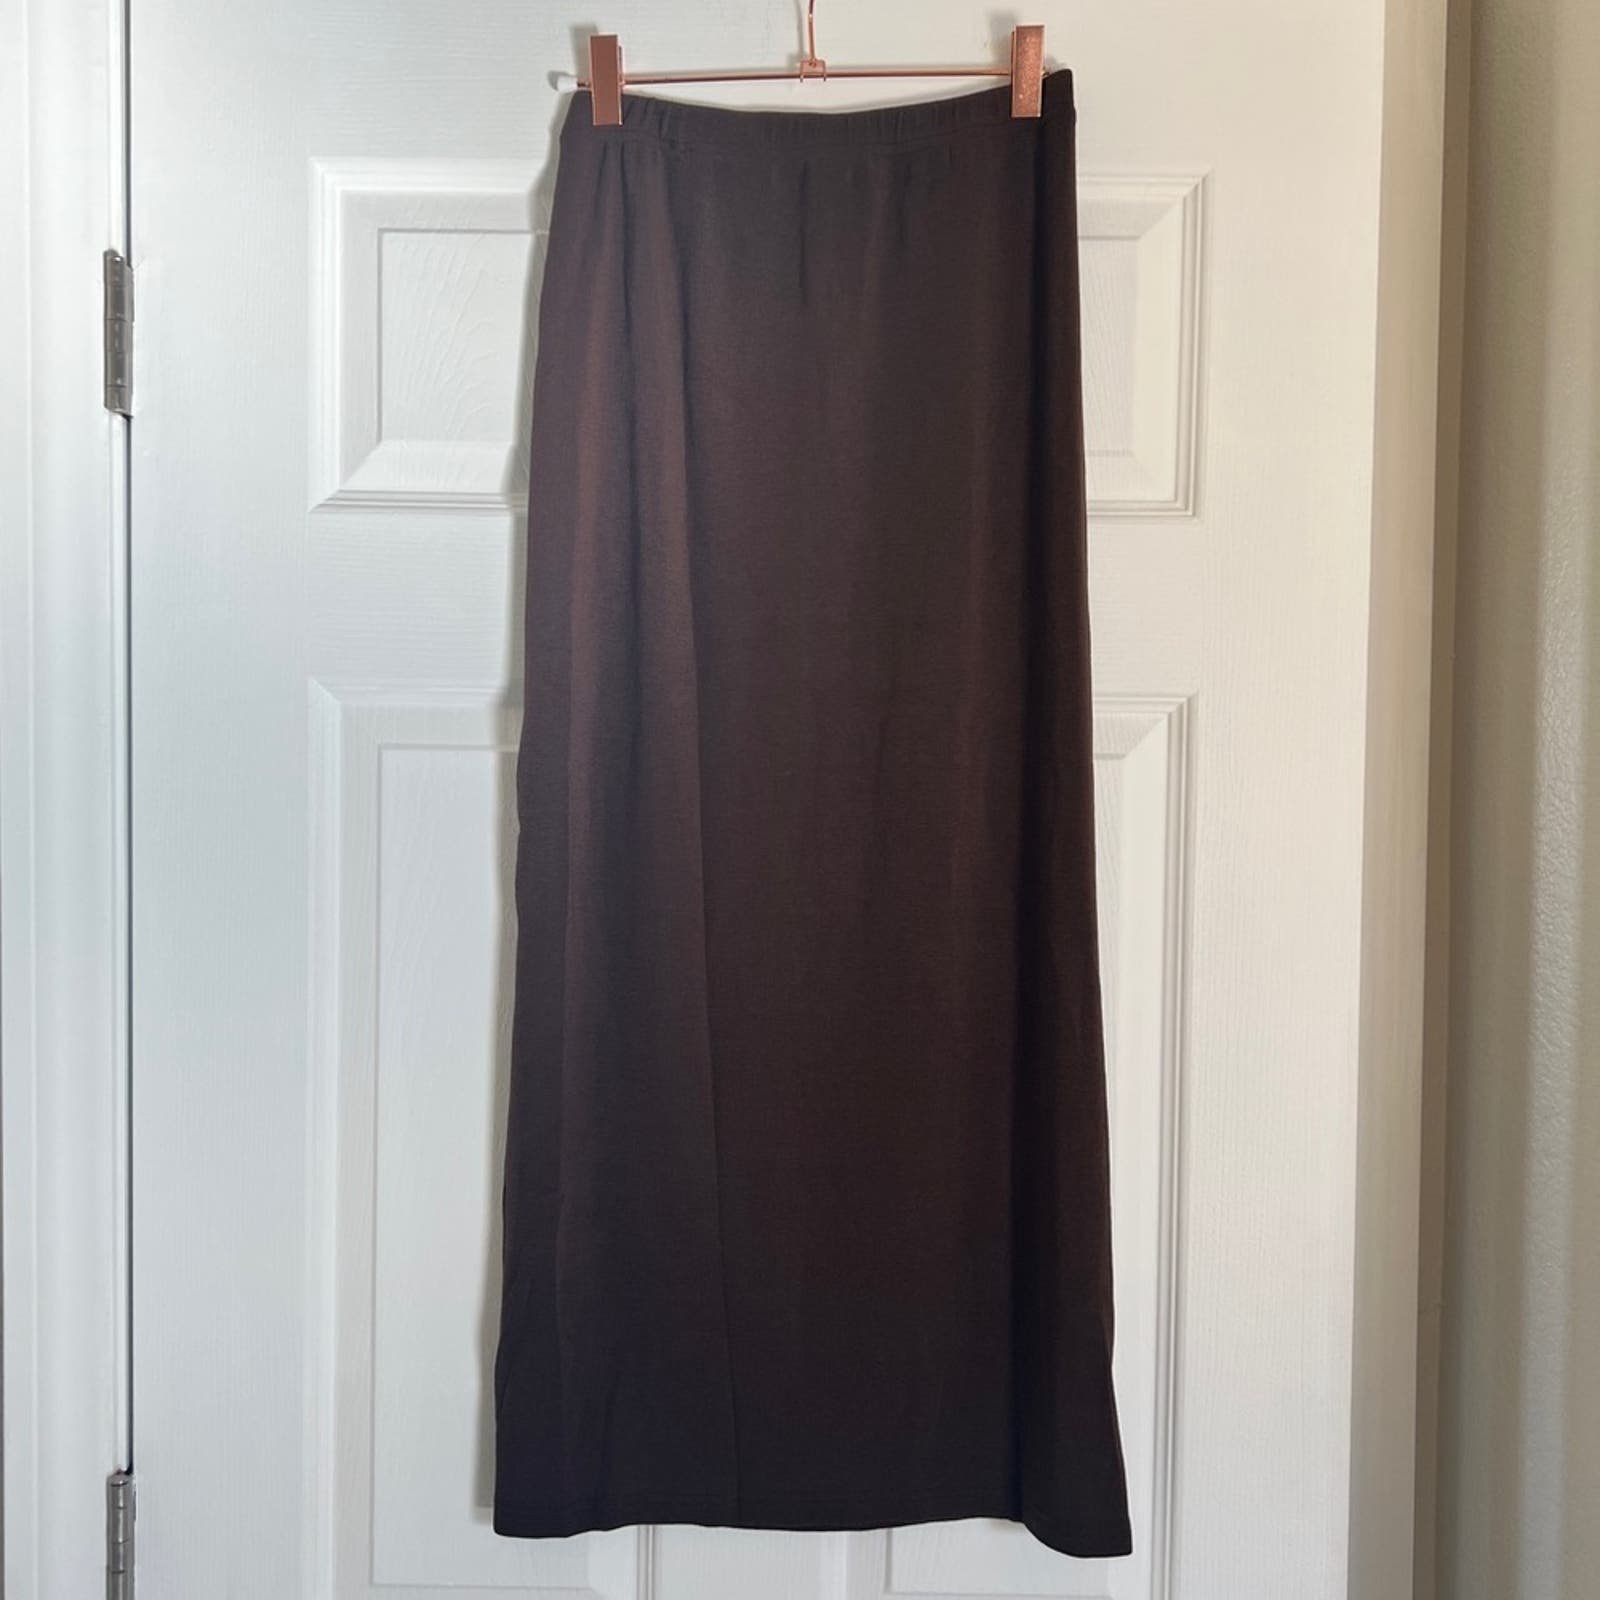 the Lowest price Commense High Waist Brown Midi Slit NWT XS Nq2ovzHqs hot sale